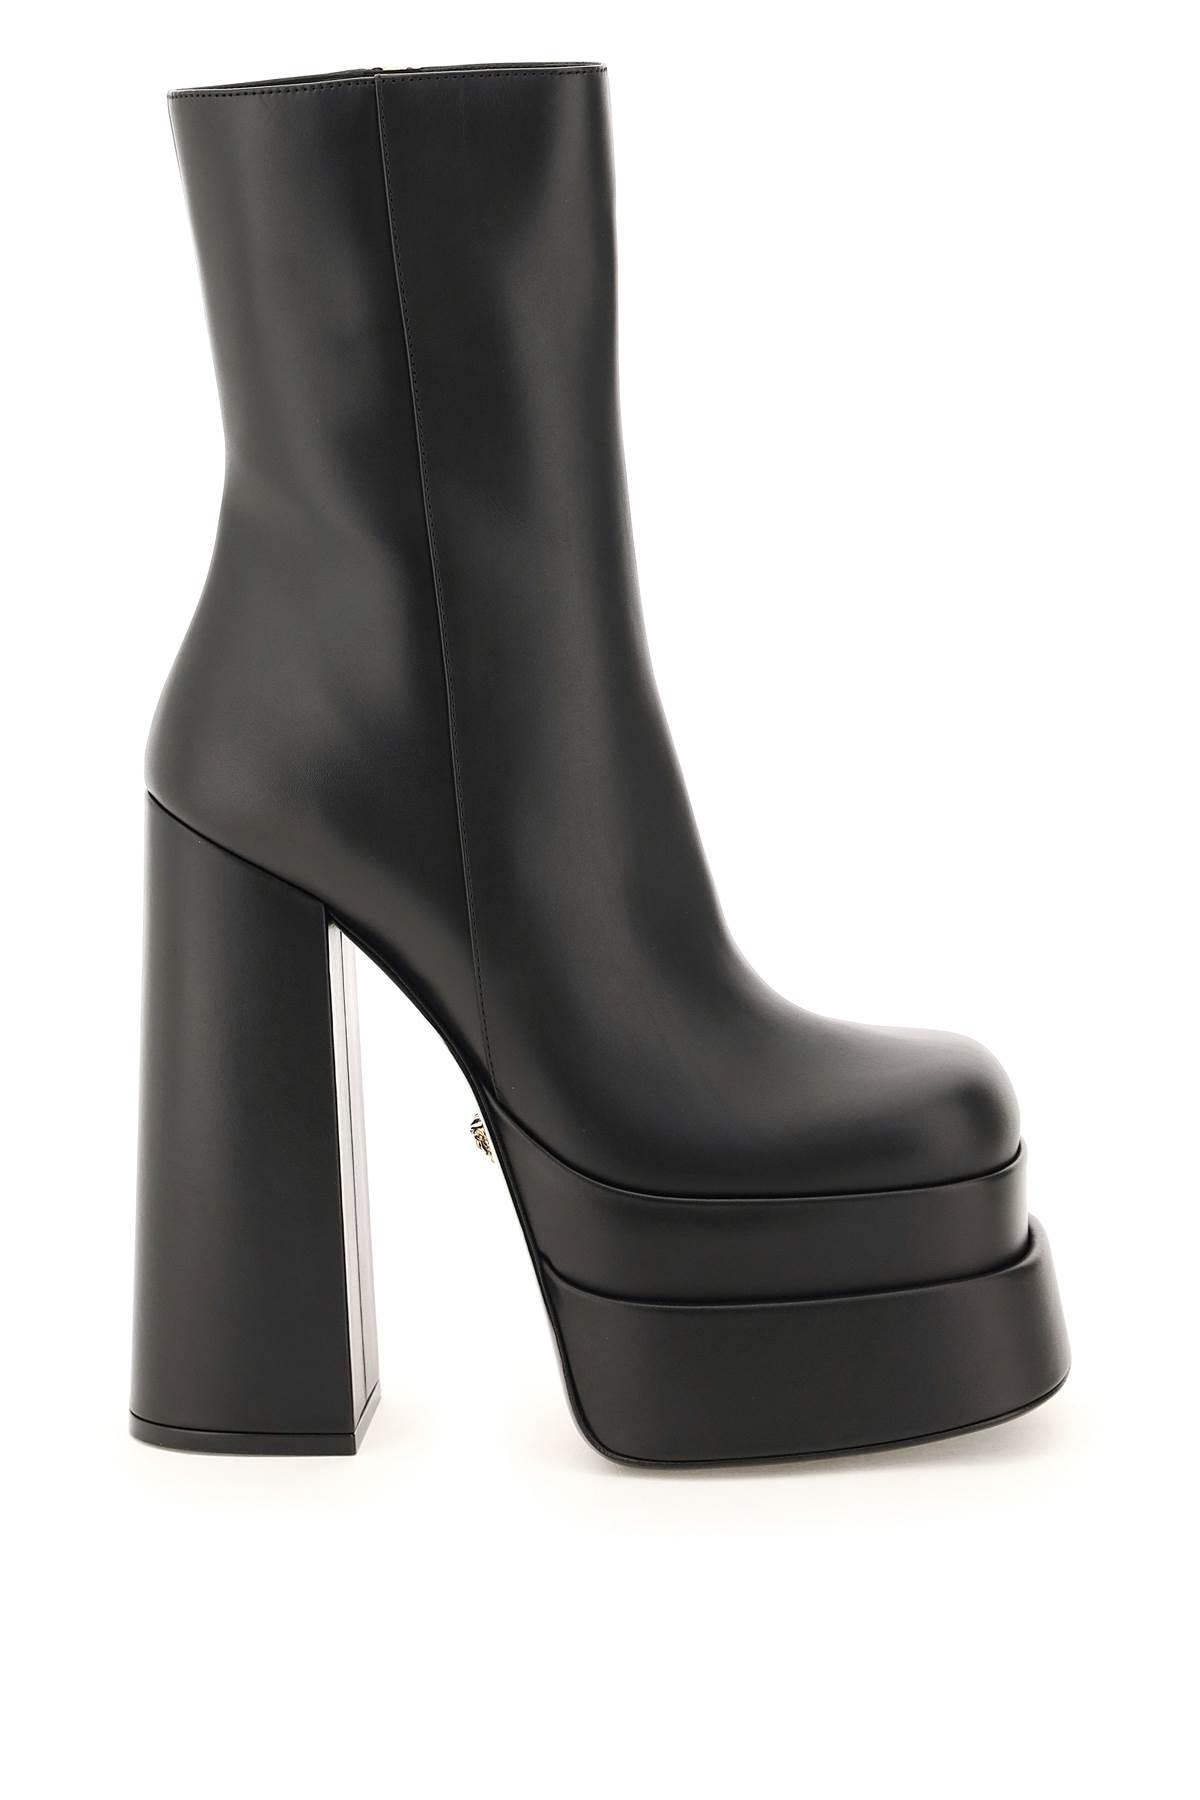 Versace Intrico Double Platform Ankle Boots in Gray | Lyst